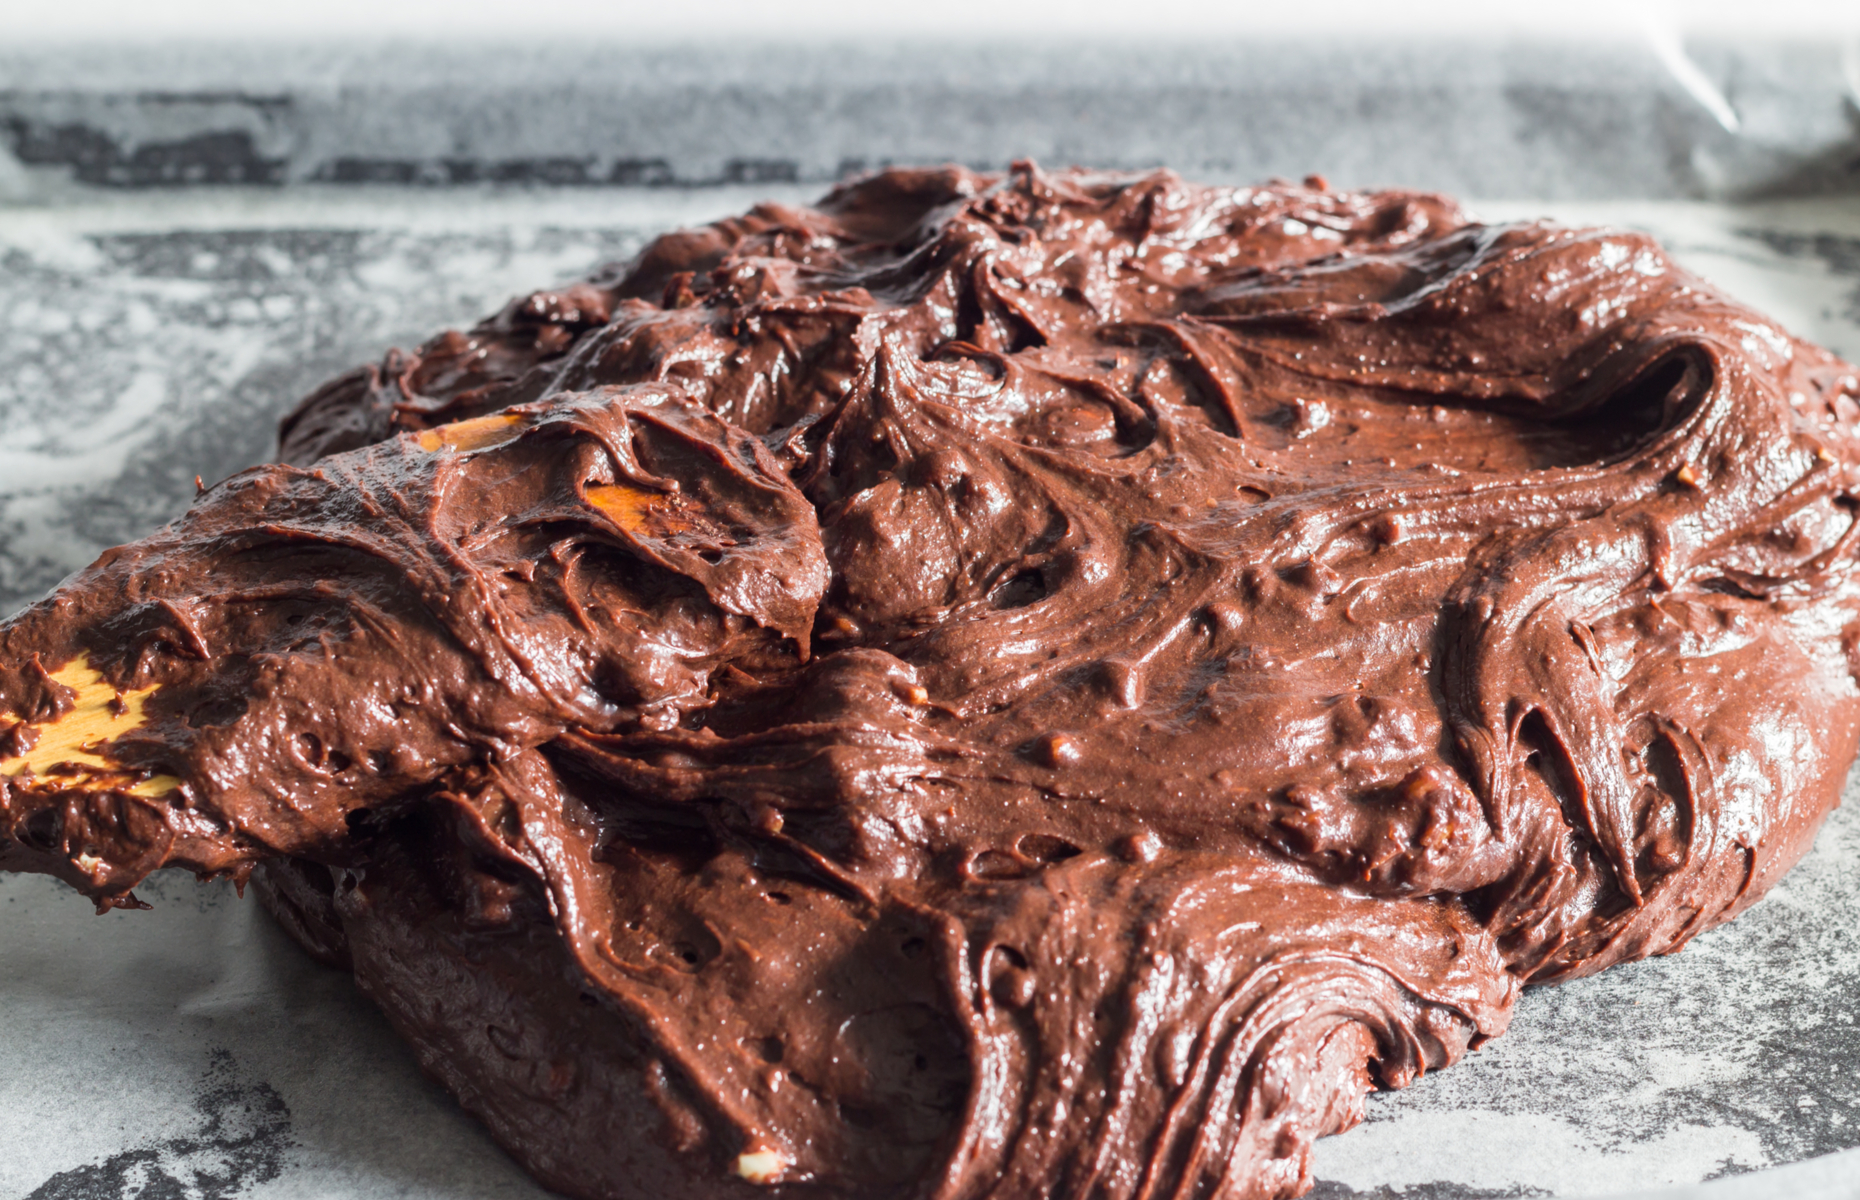 Brownie batter in a tin (Image: Madele/Shutterstock)